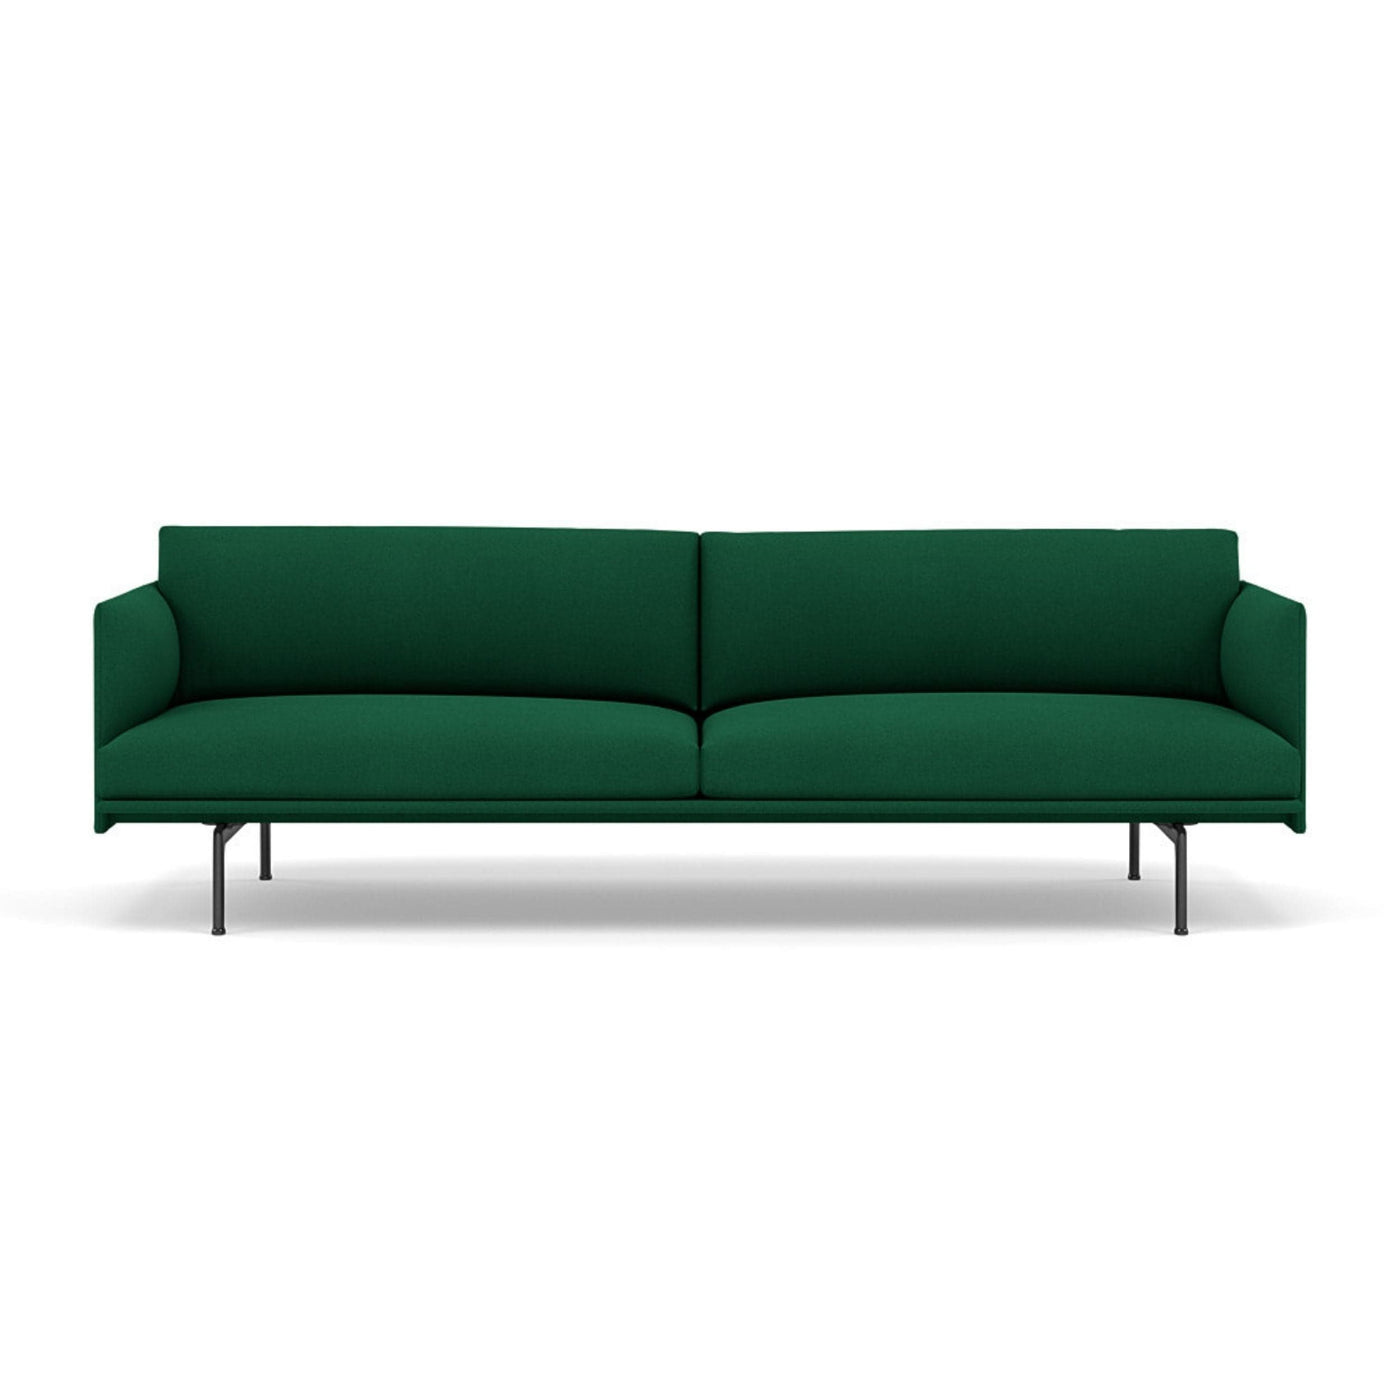 Muuto Outline  Studio Sofa 220 in hallingdal 944 and black legs. Made to order from someday designs. #colour_hallingdal-944-green